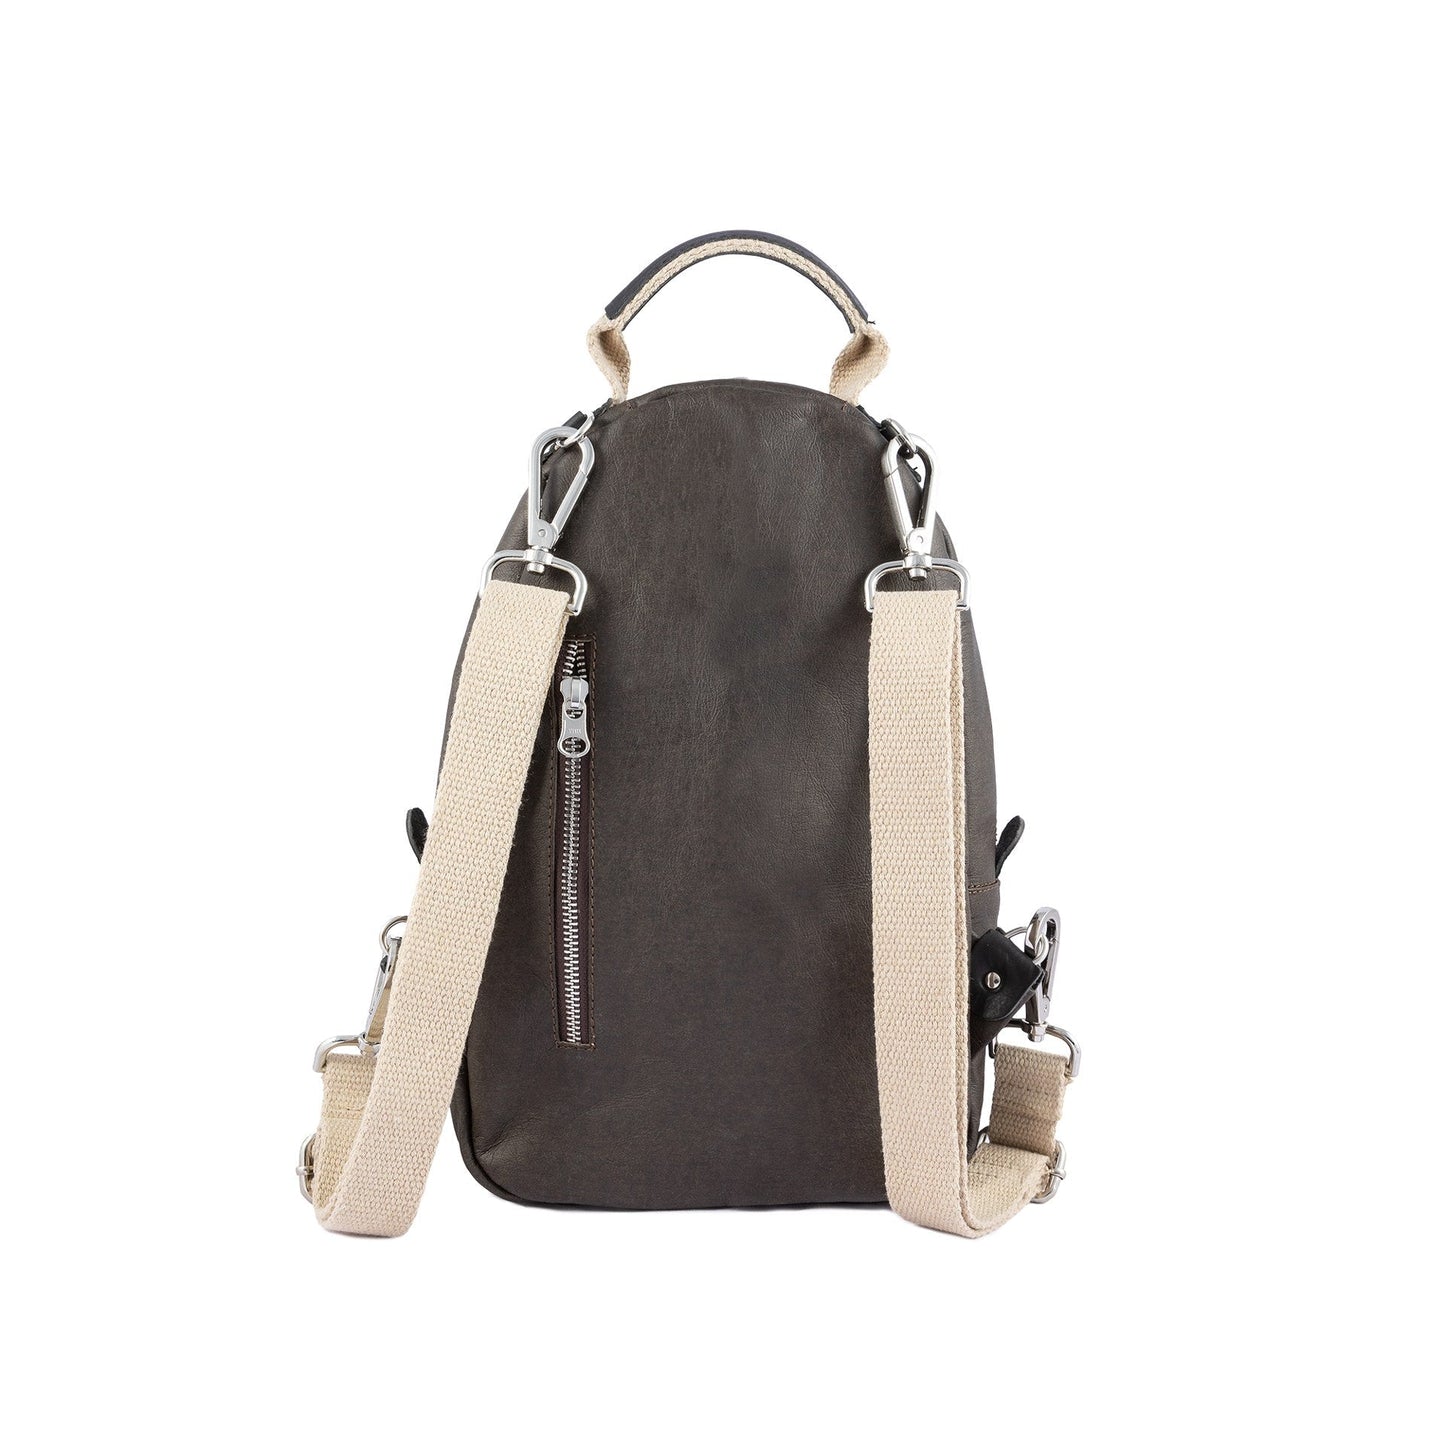 A dark grey washable paper backpack is shown from a back angle. It features two adjustable cream canvas shoulder straps and a silver zip pocket in the rear.